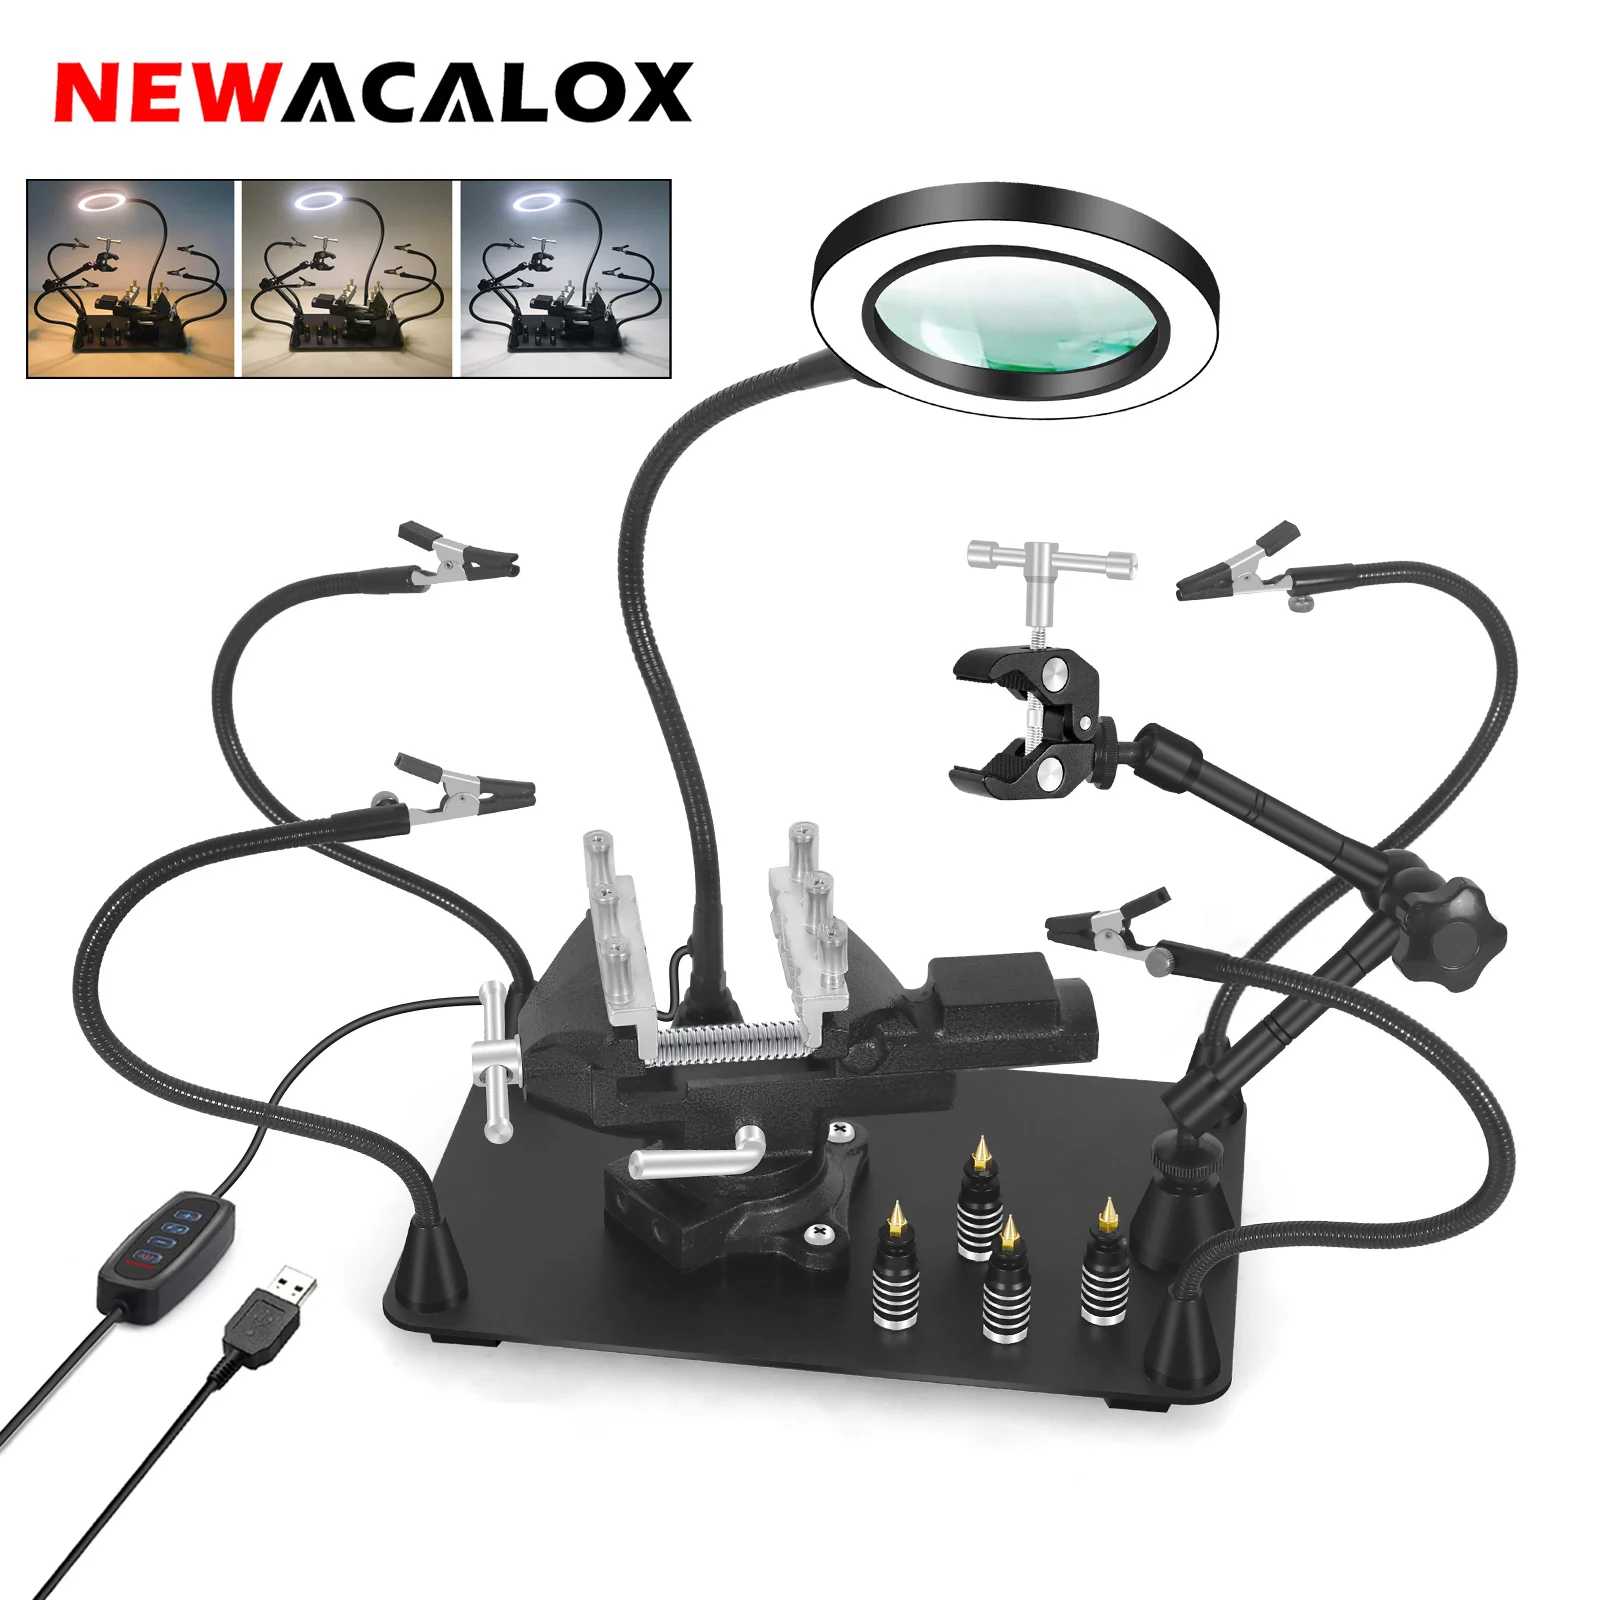 NEWACALOX Magnetic Helping Hands Soldering Third Hand PCB Circuit Board Holder with 5X LED Magnifying Lamp 360 Heat Gun Holder newacalox 360° adjustable pcb holder with 2pcs magnetic flexible soldering third hand welding repair helping hands station